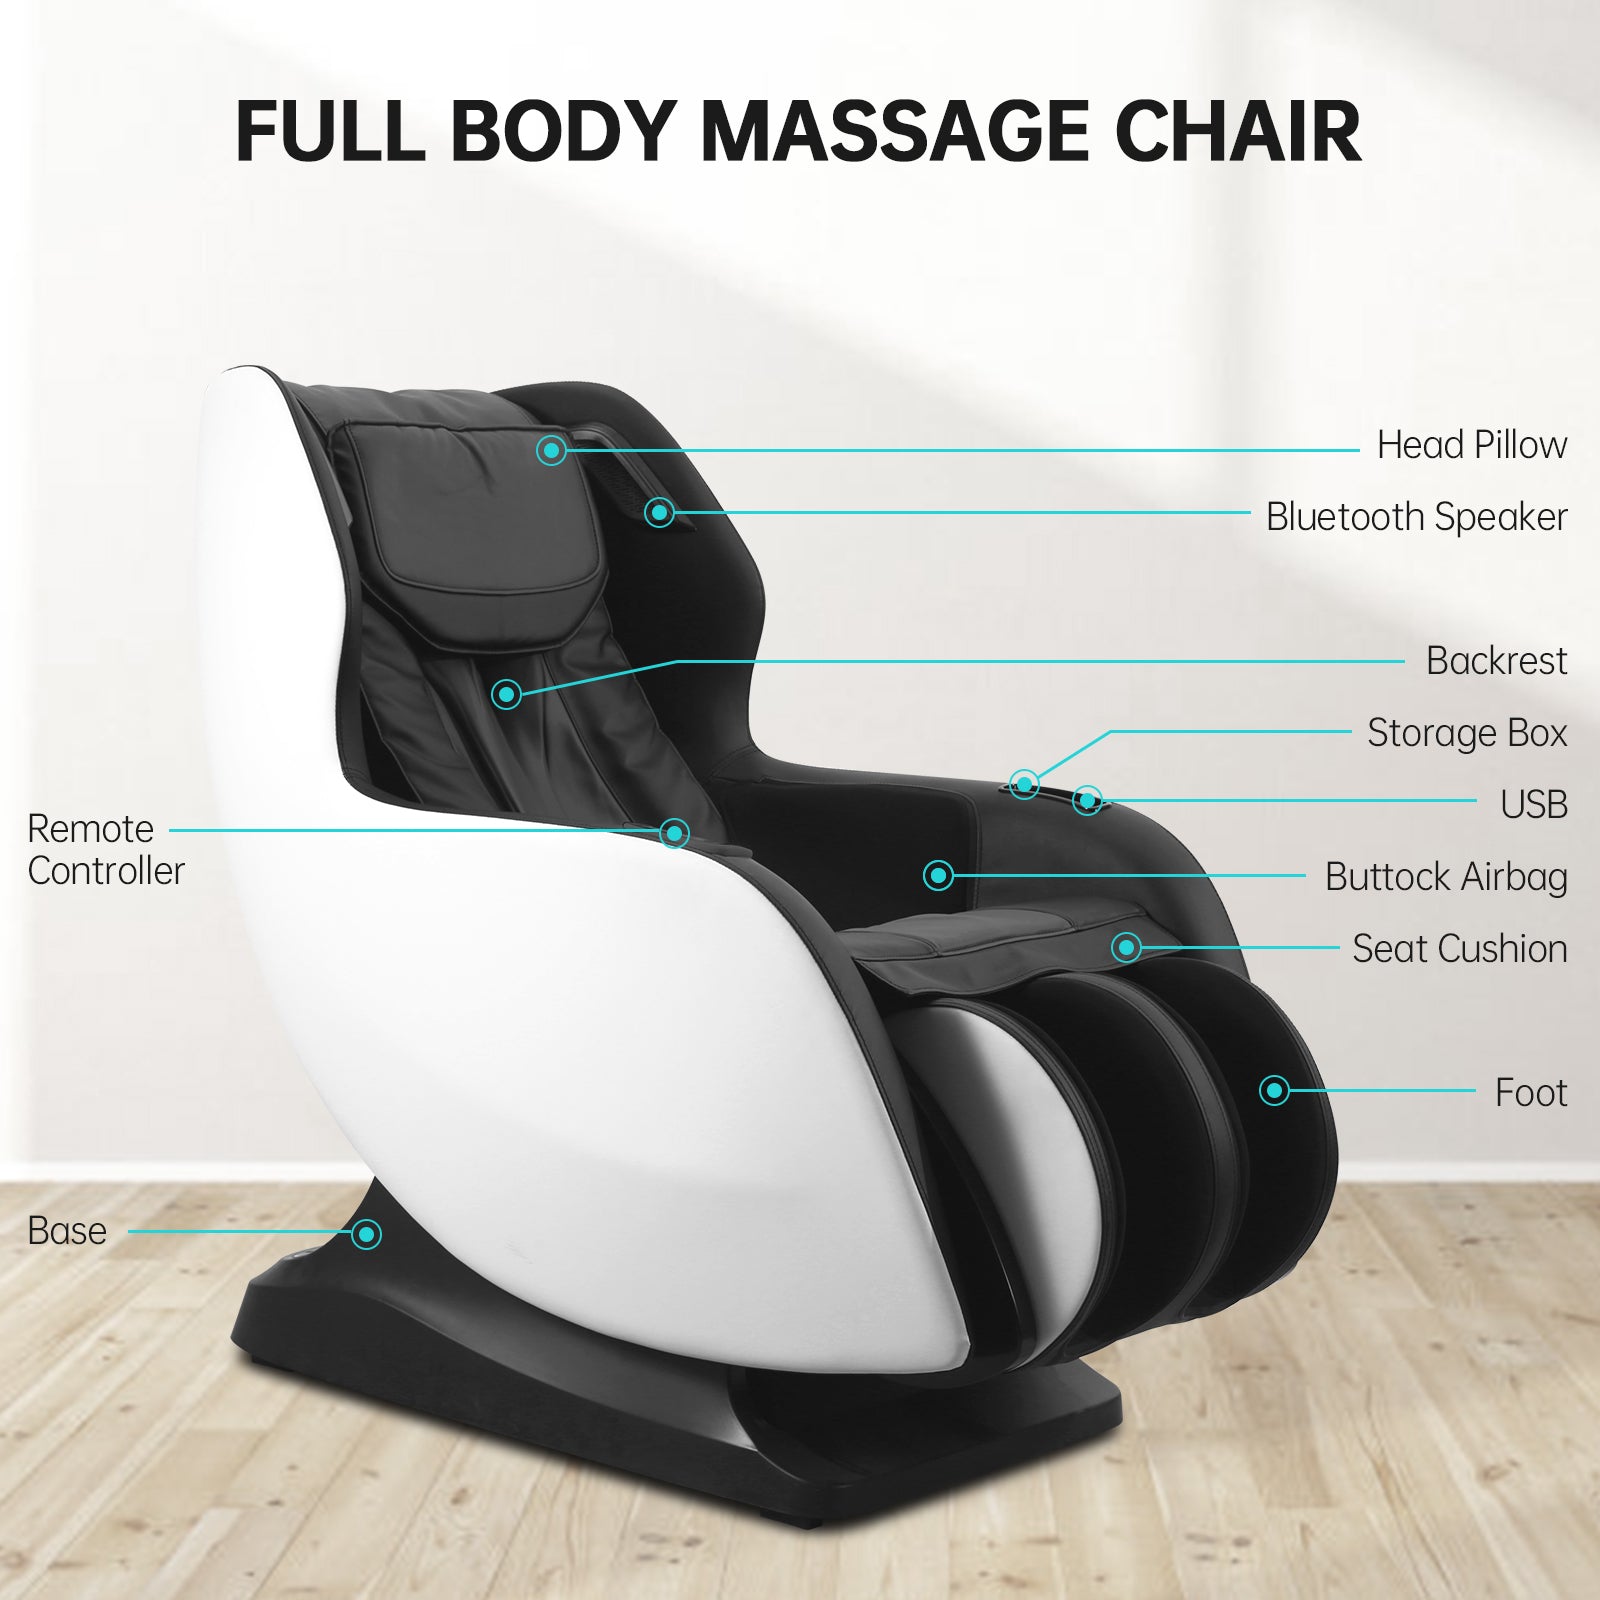 Load image into Gallery viewer, Massage Chair Full Body Zero Gravity Chair Massager, Shiatsu Massage Chair Recliner Space Saving with Bluetooth, SL Track, for Parents &amp; Family for Home &amp; Office Use - Black &amp; White
